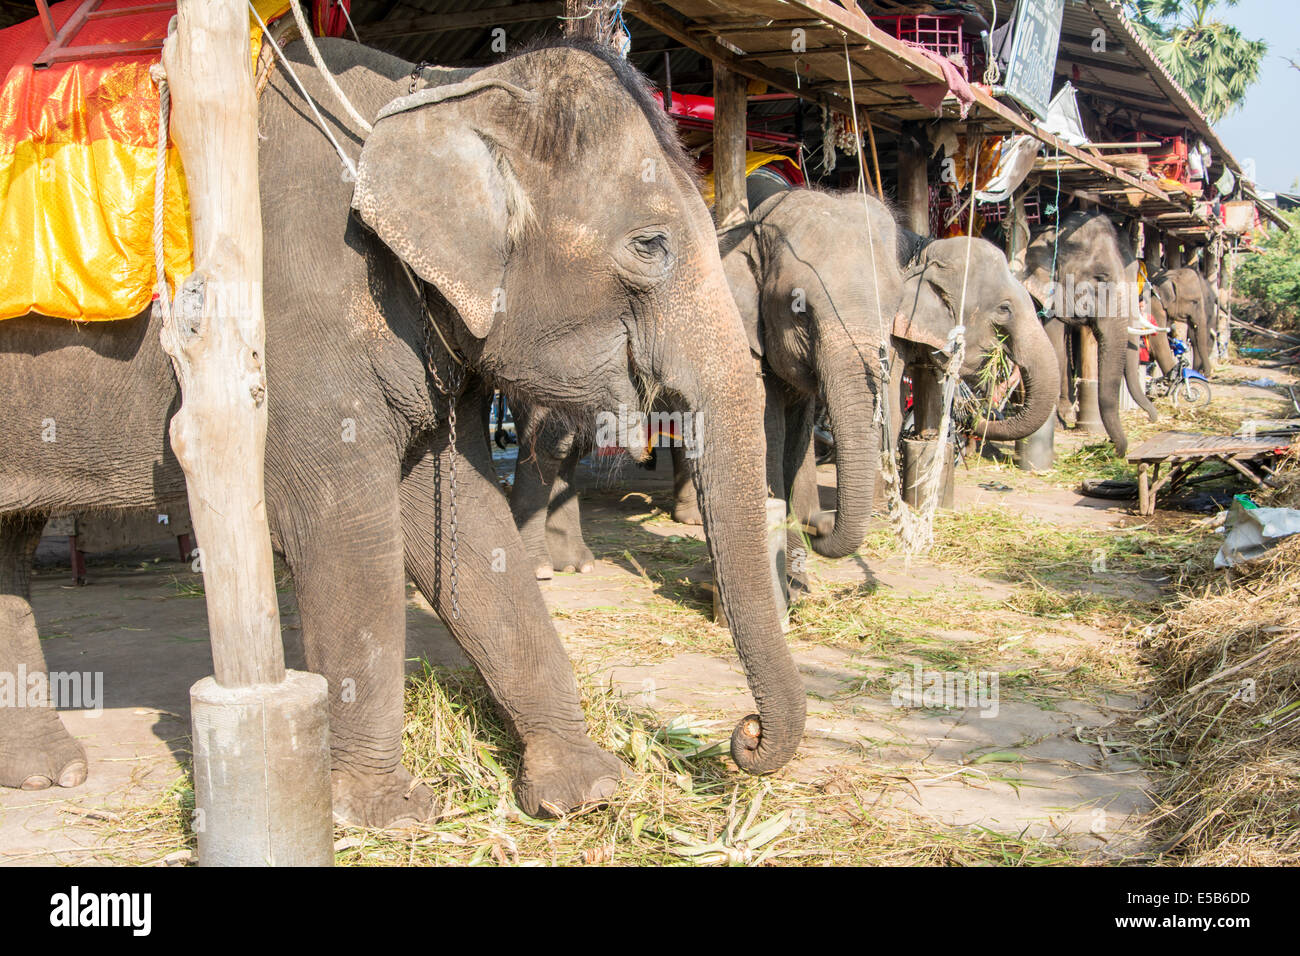 Feeding young elephants into a outdoor stable, Ayuthaya, Thailand Stock Photo